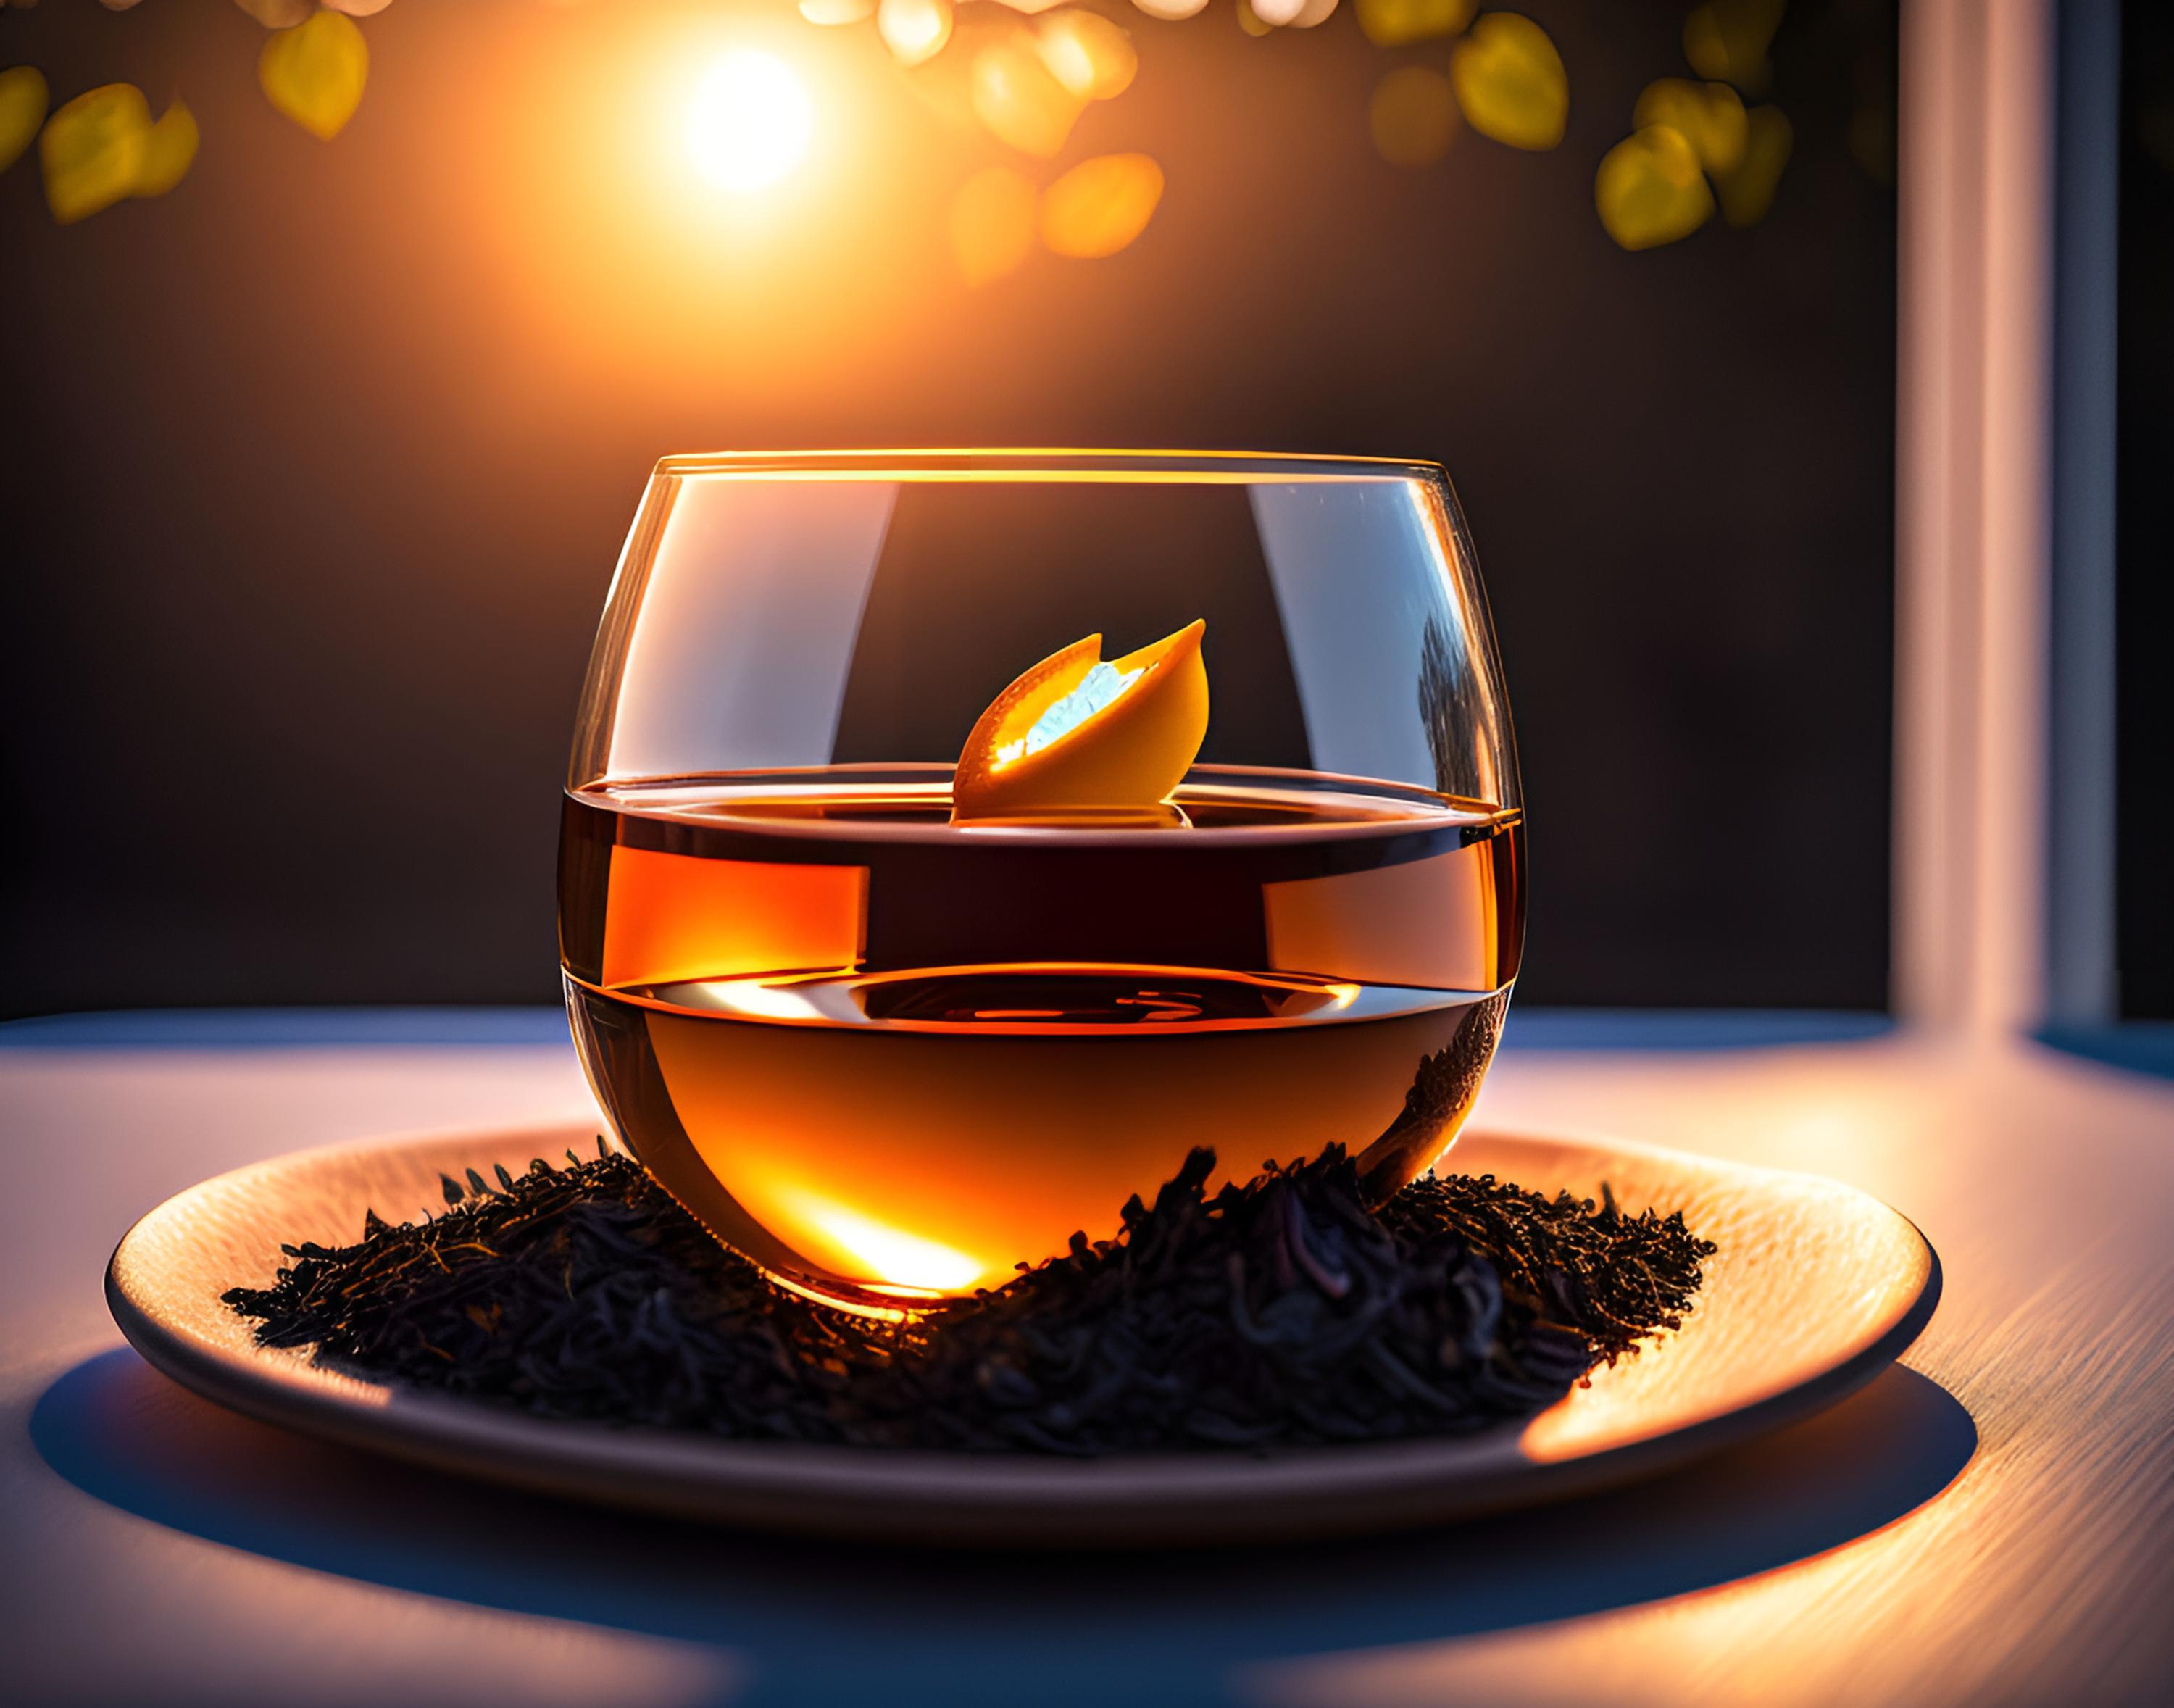 Black tea in a glass cup against a window